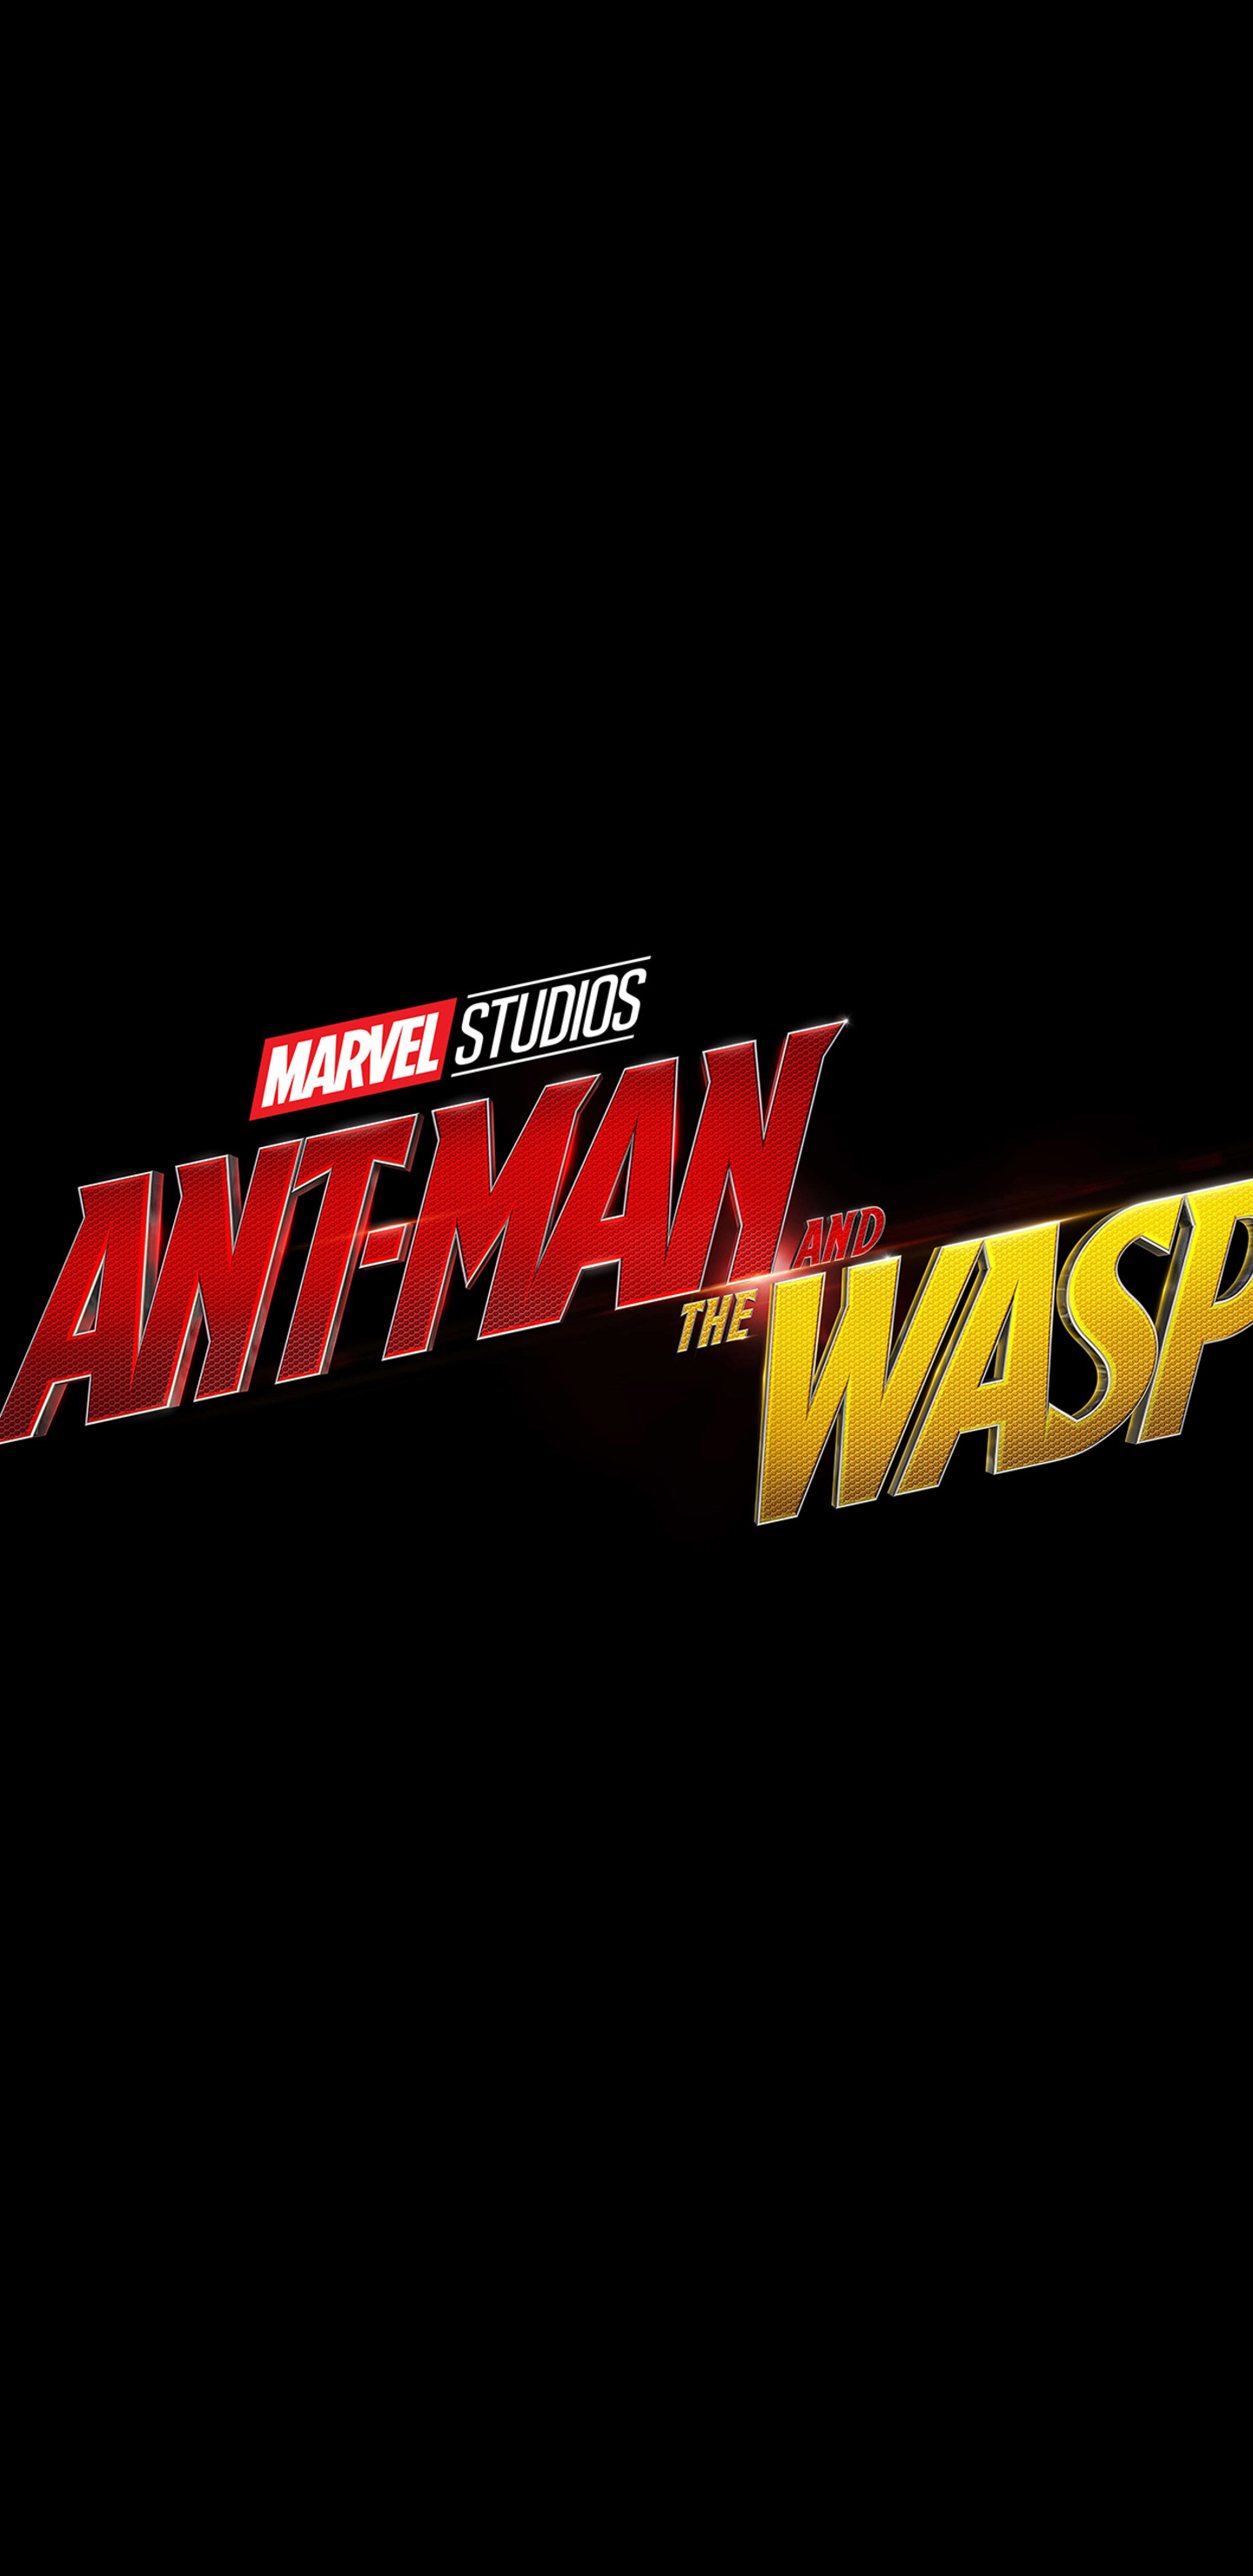 ant-man-and-the-wasp-movie-logo-48.jpg